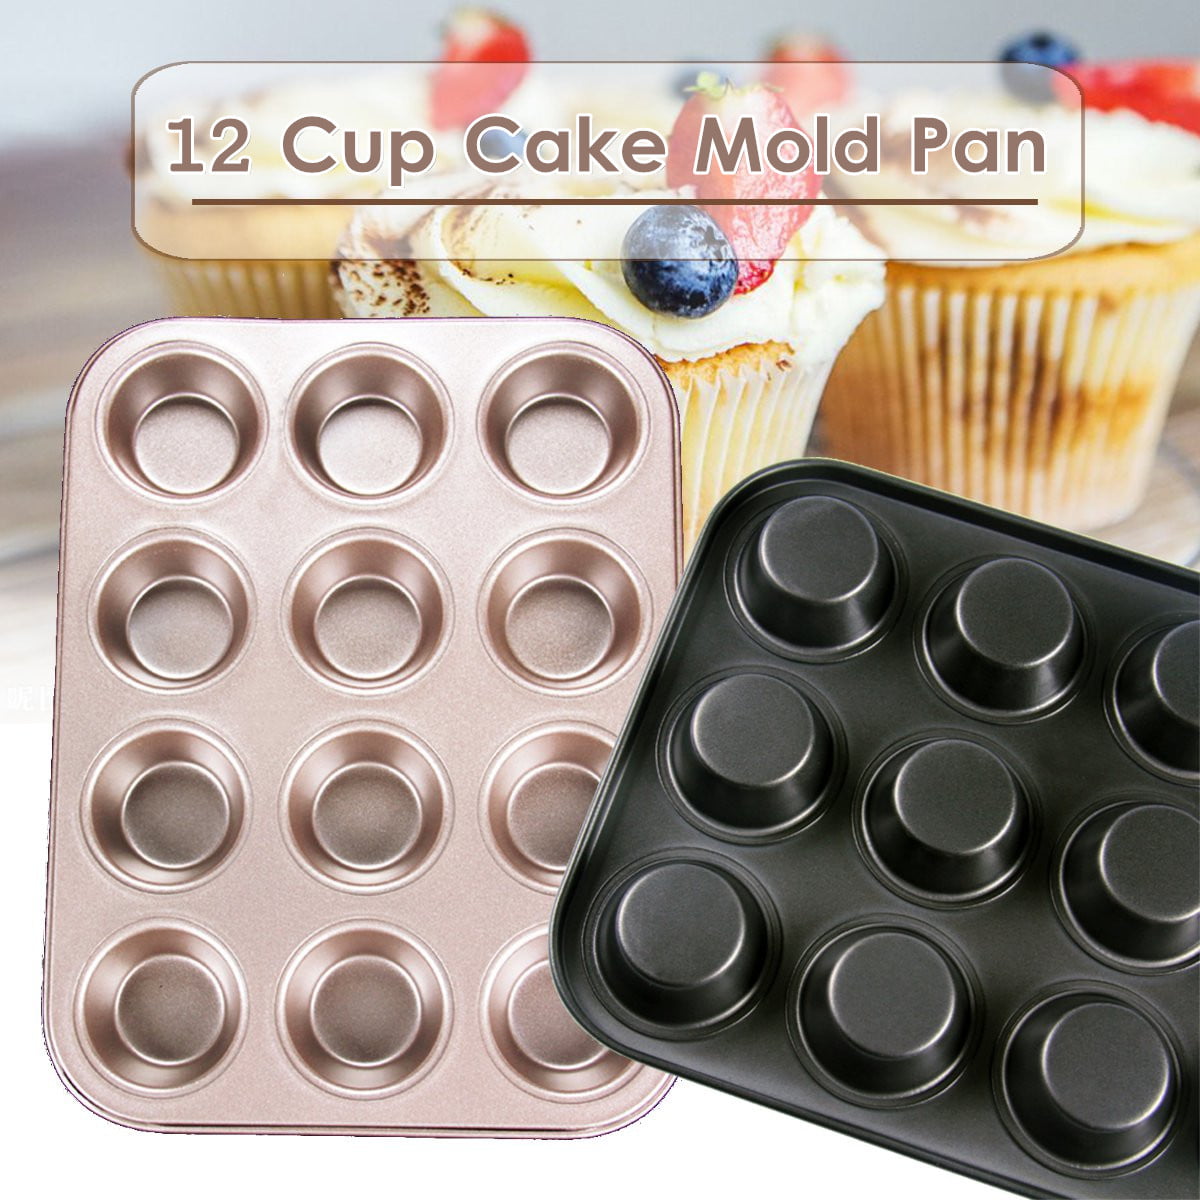 12 Grid Cake Mold Pan Muffin Cupcake Bakeware Oven Tray Mould Bakery Kitchen 